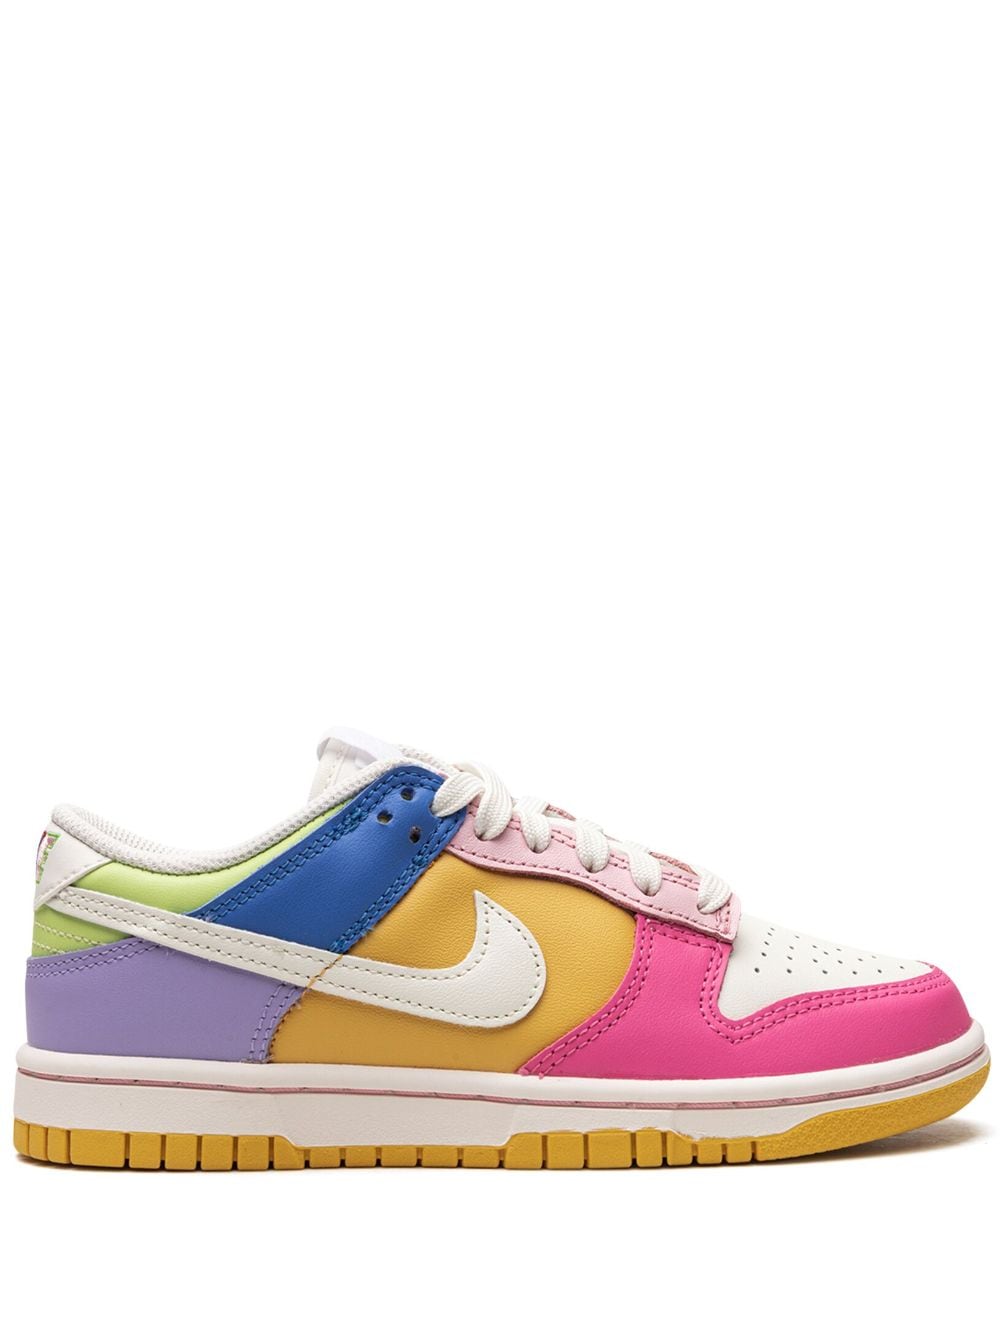 Nike Dunk Low “Multicolour” sneakers - Pink von Nike